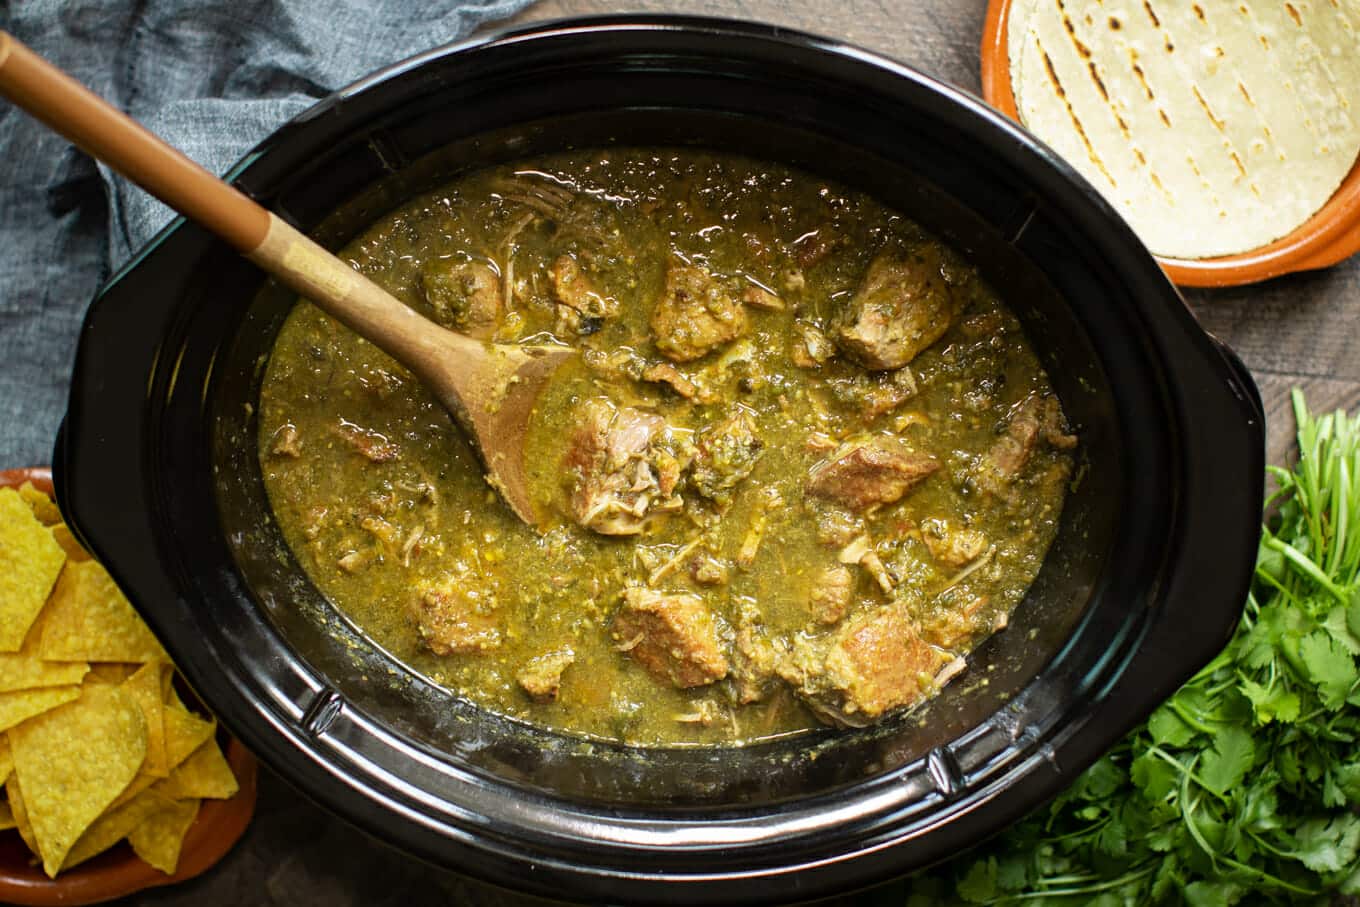 Finished cooking chile verde in the slow cooker with tortillas and cilantro on the side.